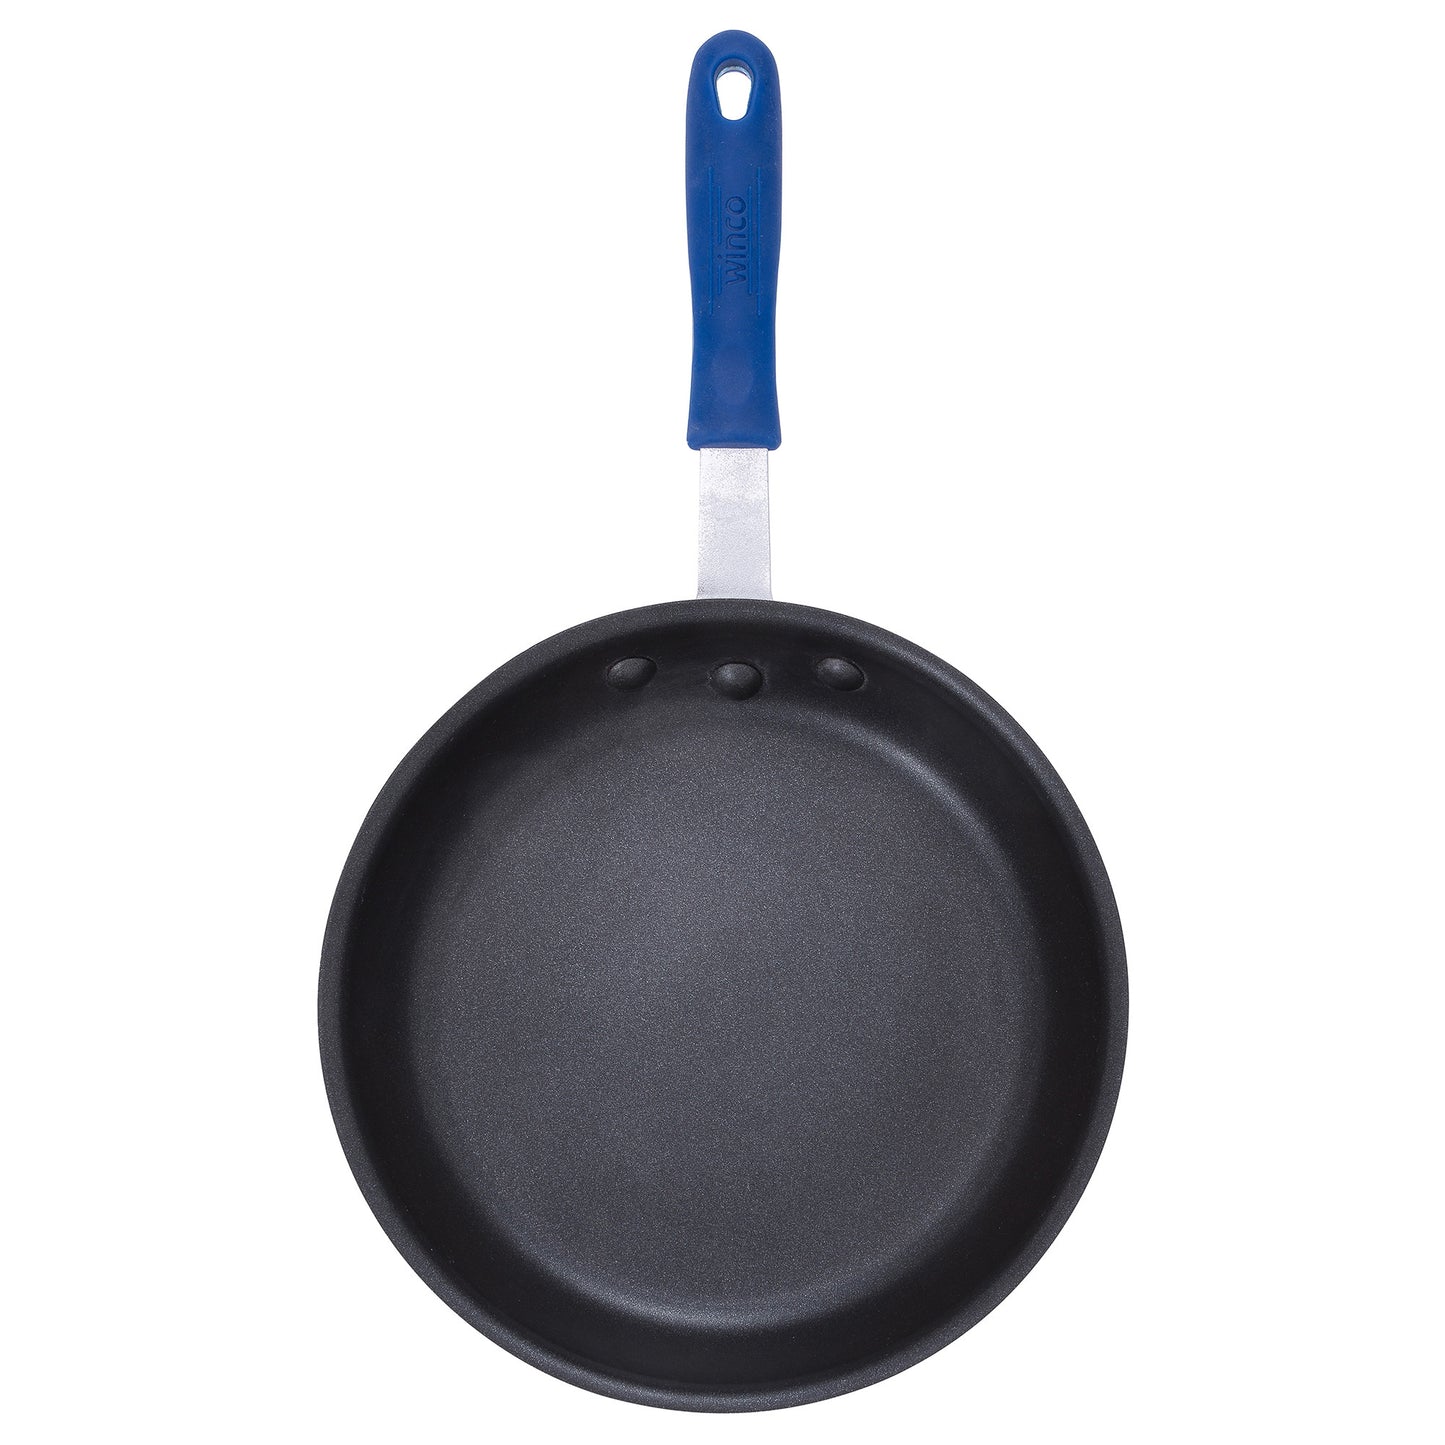 AFPI-10NH - Induction Ready Aluminum Fry Pan, Stainless Steel Bottom, Non-Stick - 10" Dia